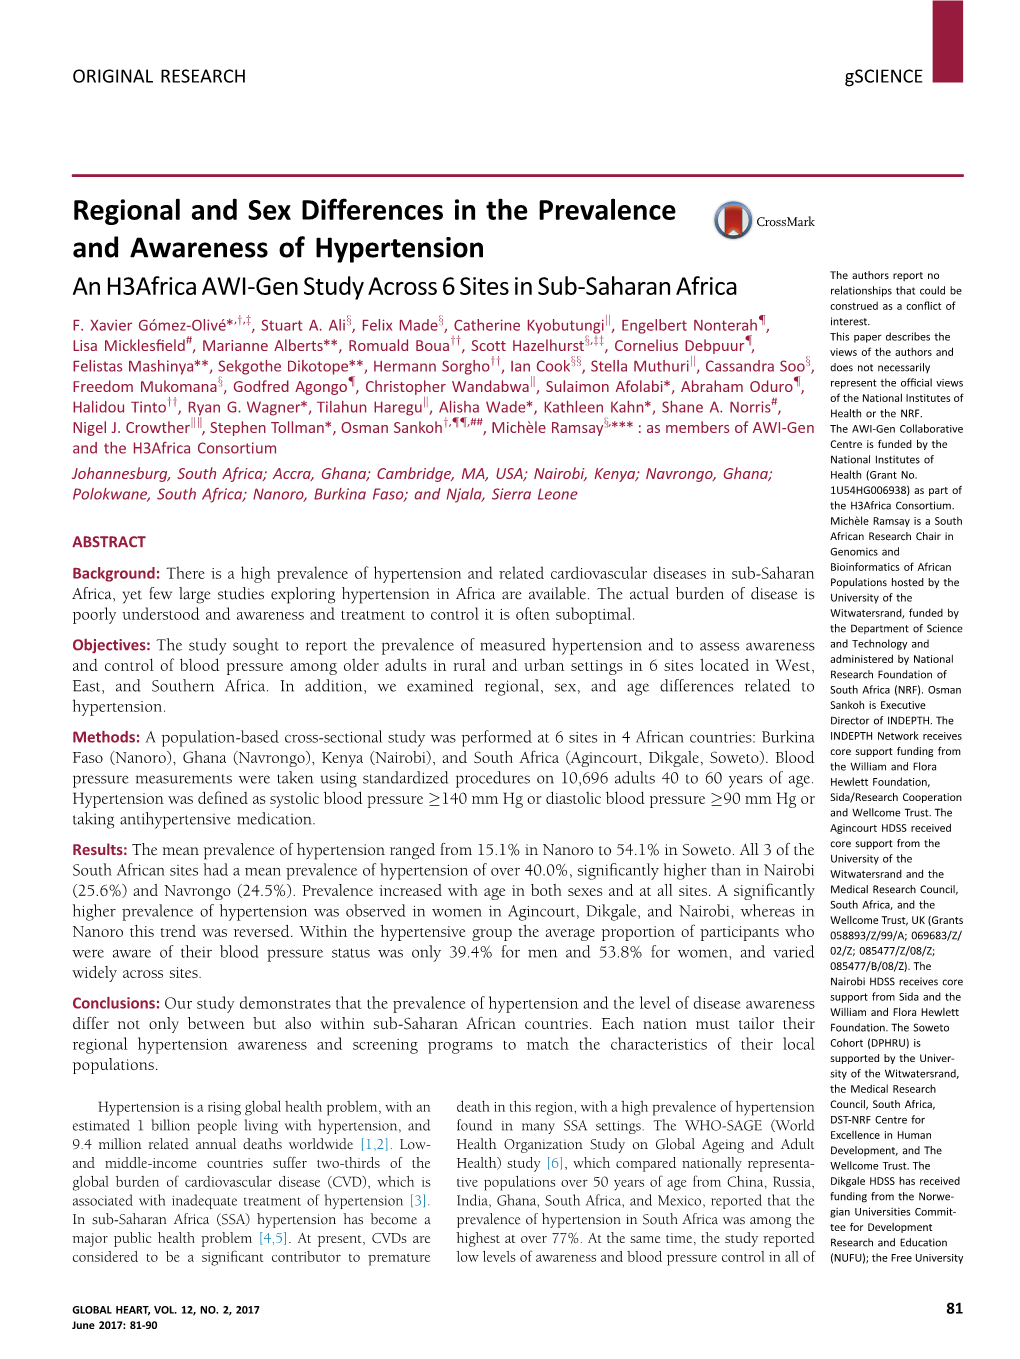 Regional and Sex Differences in the Prevalence and Awareness Of